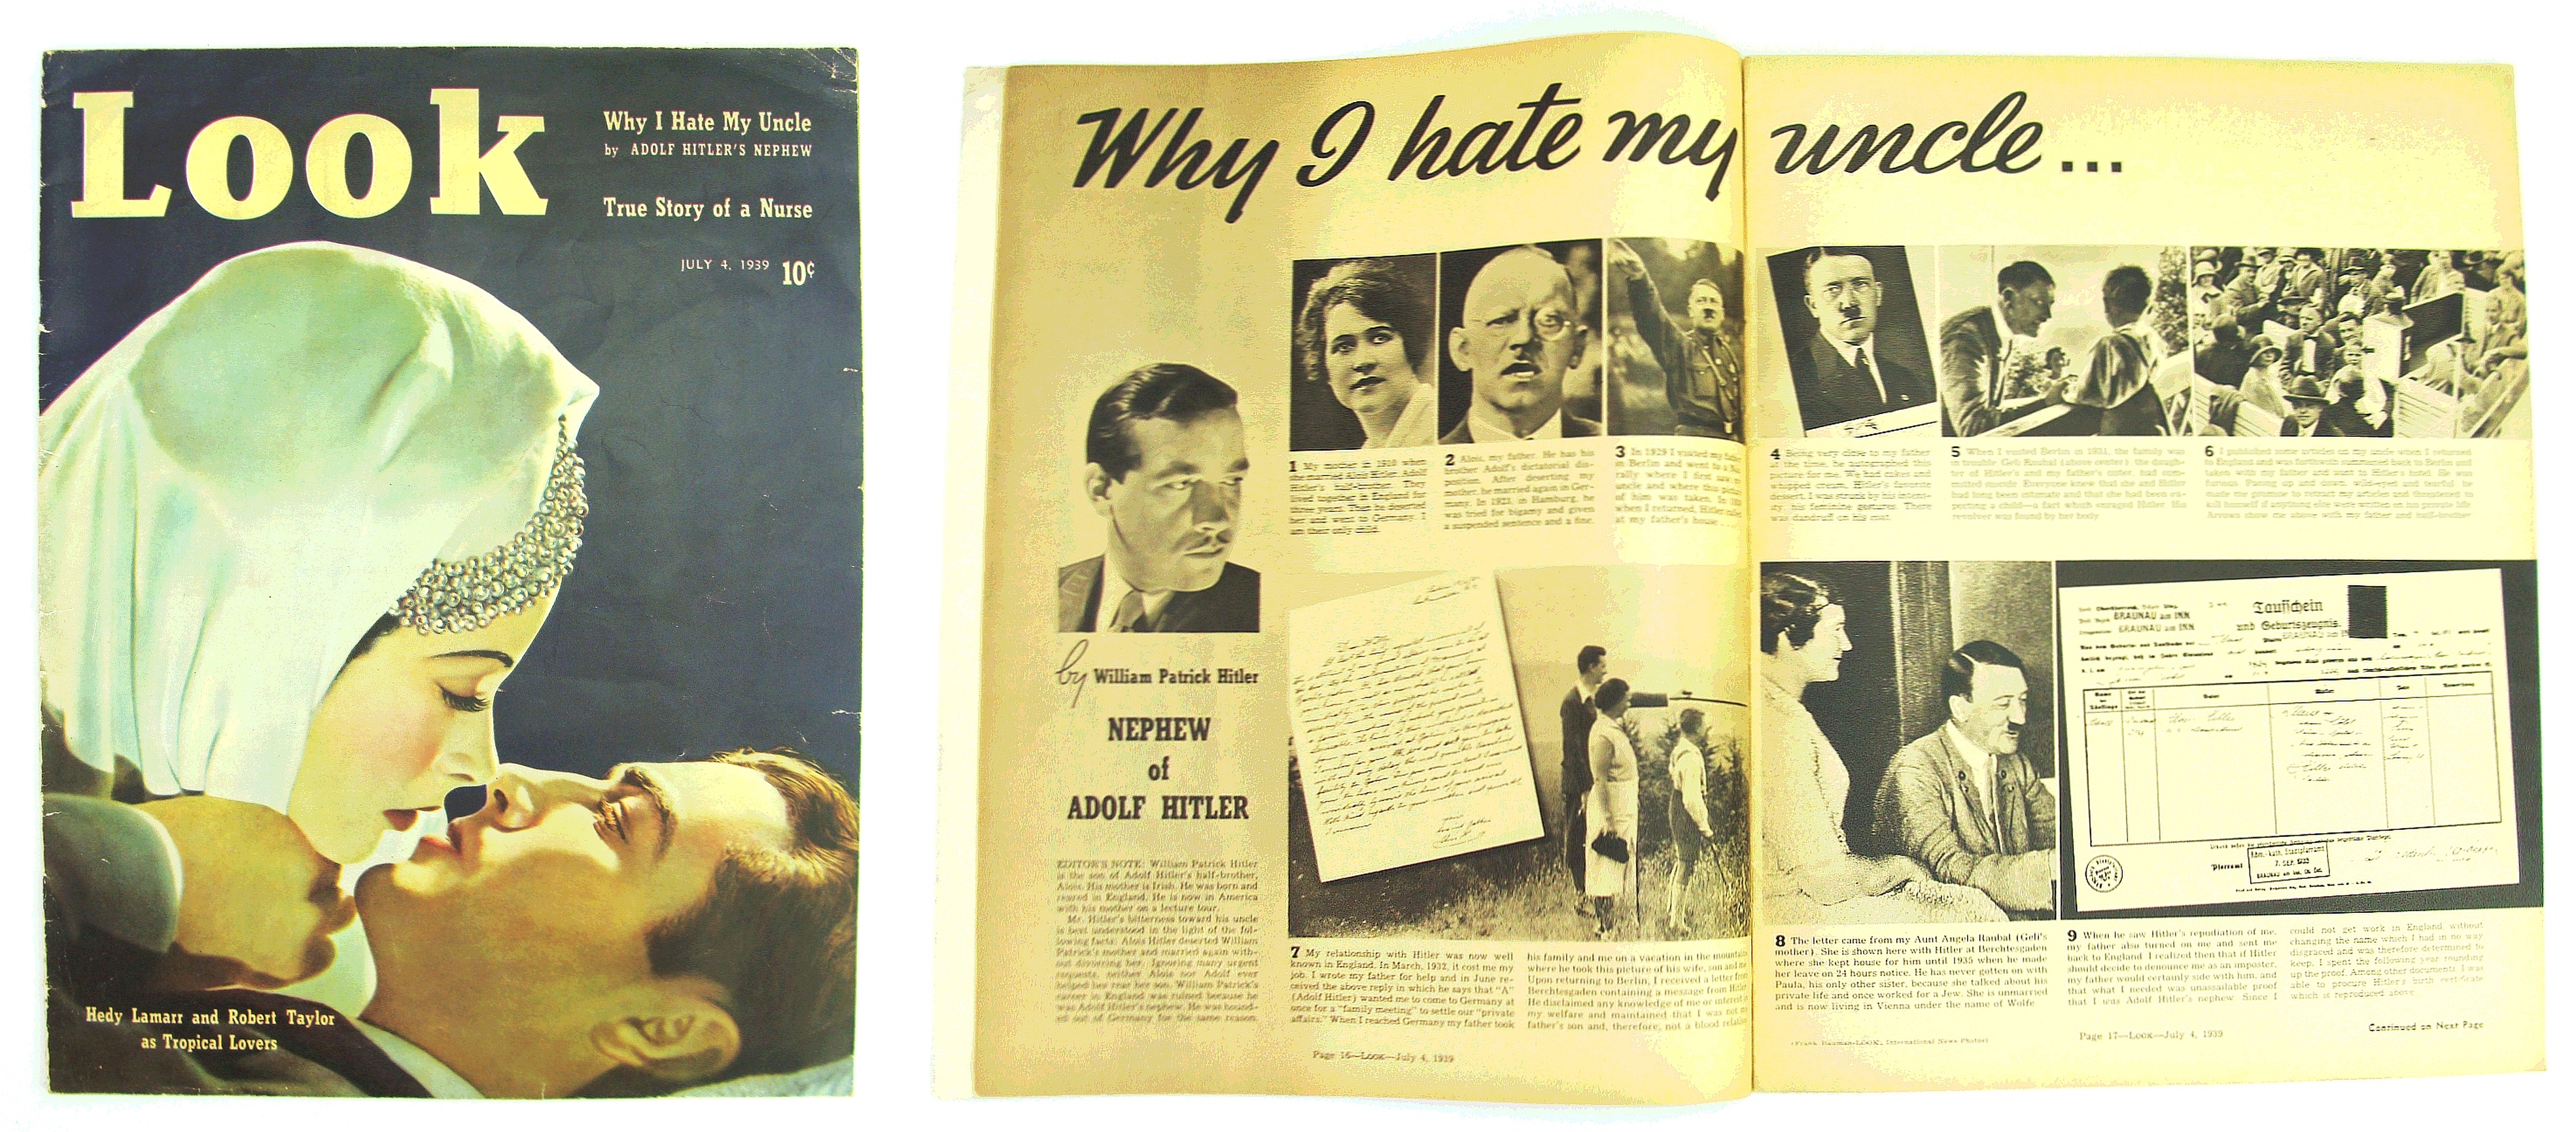 Image for Look Magazine, July 4, 1939 - Why I Hate My Uncle, By Adolph Hitler's Nephew